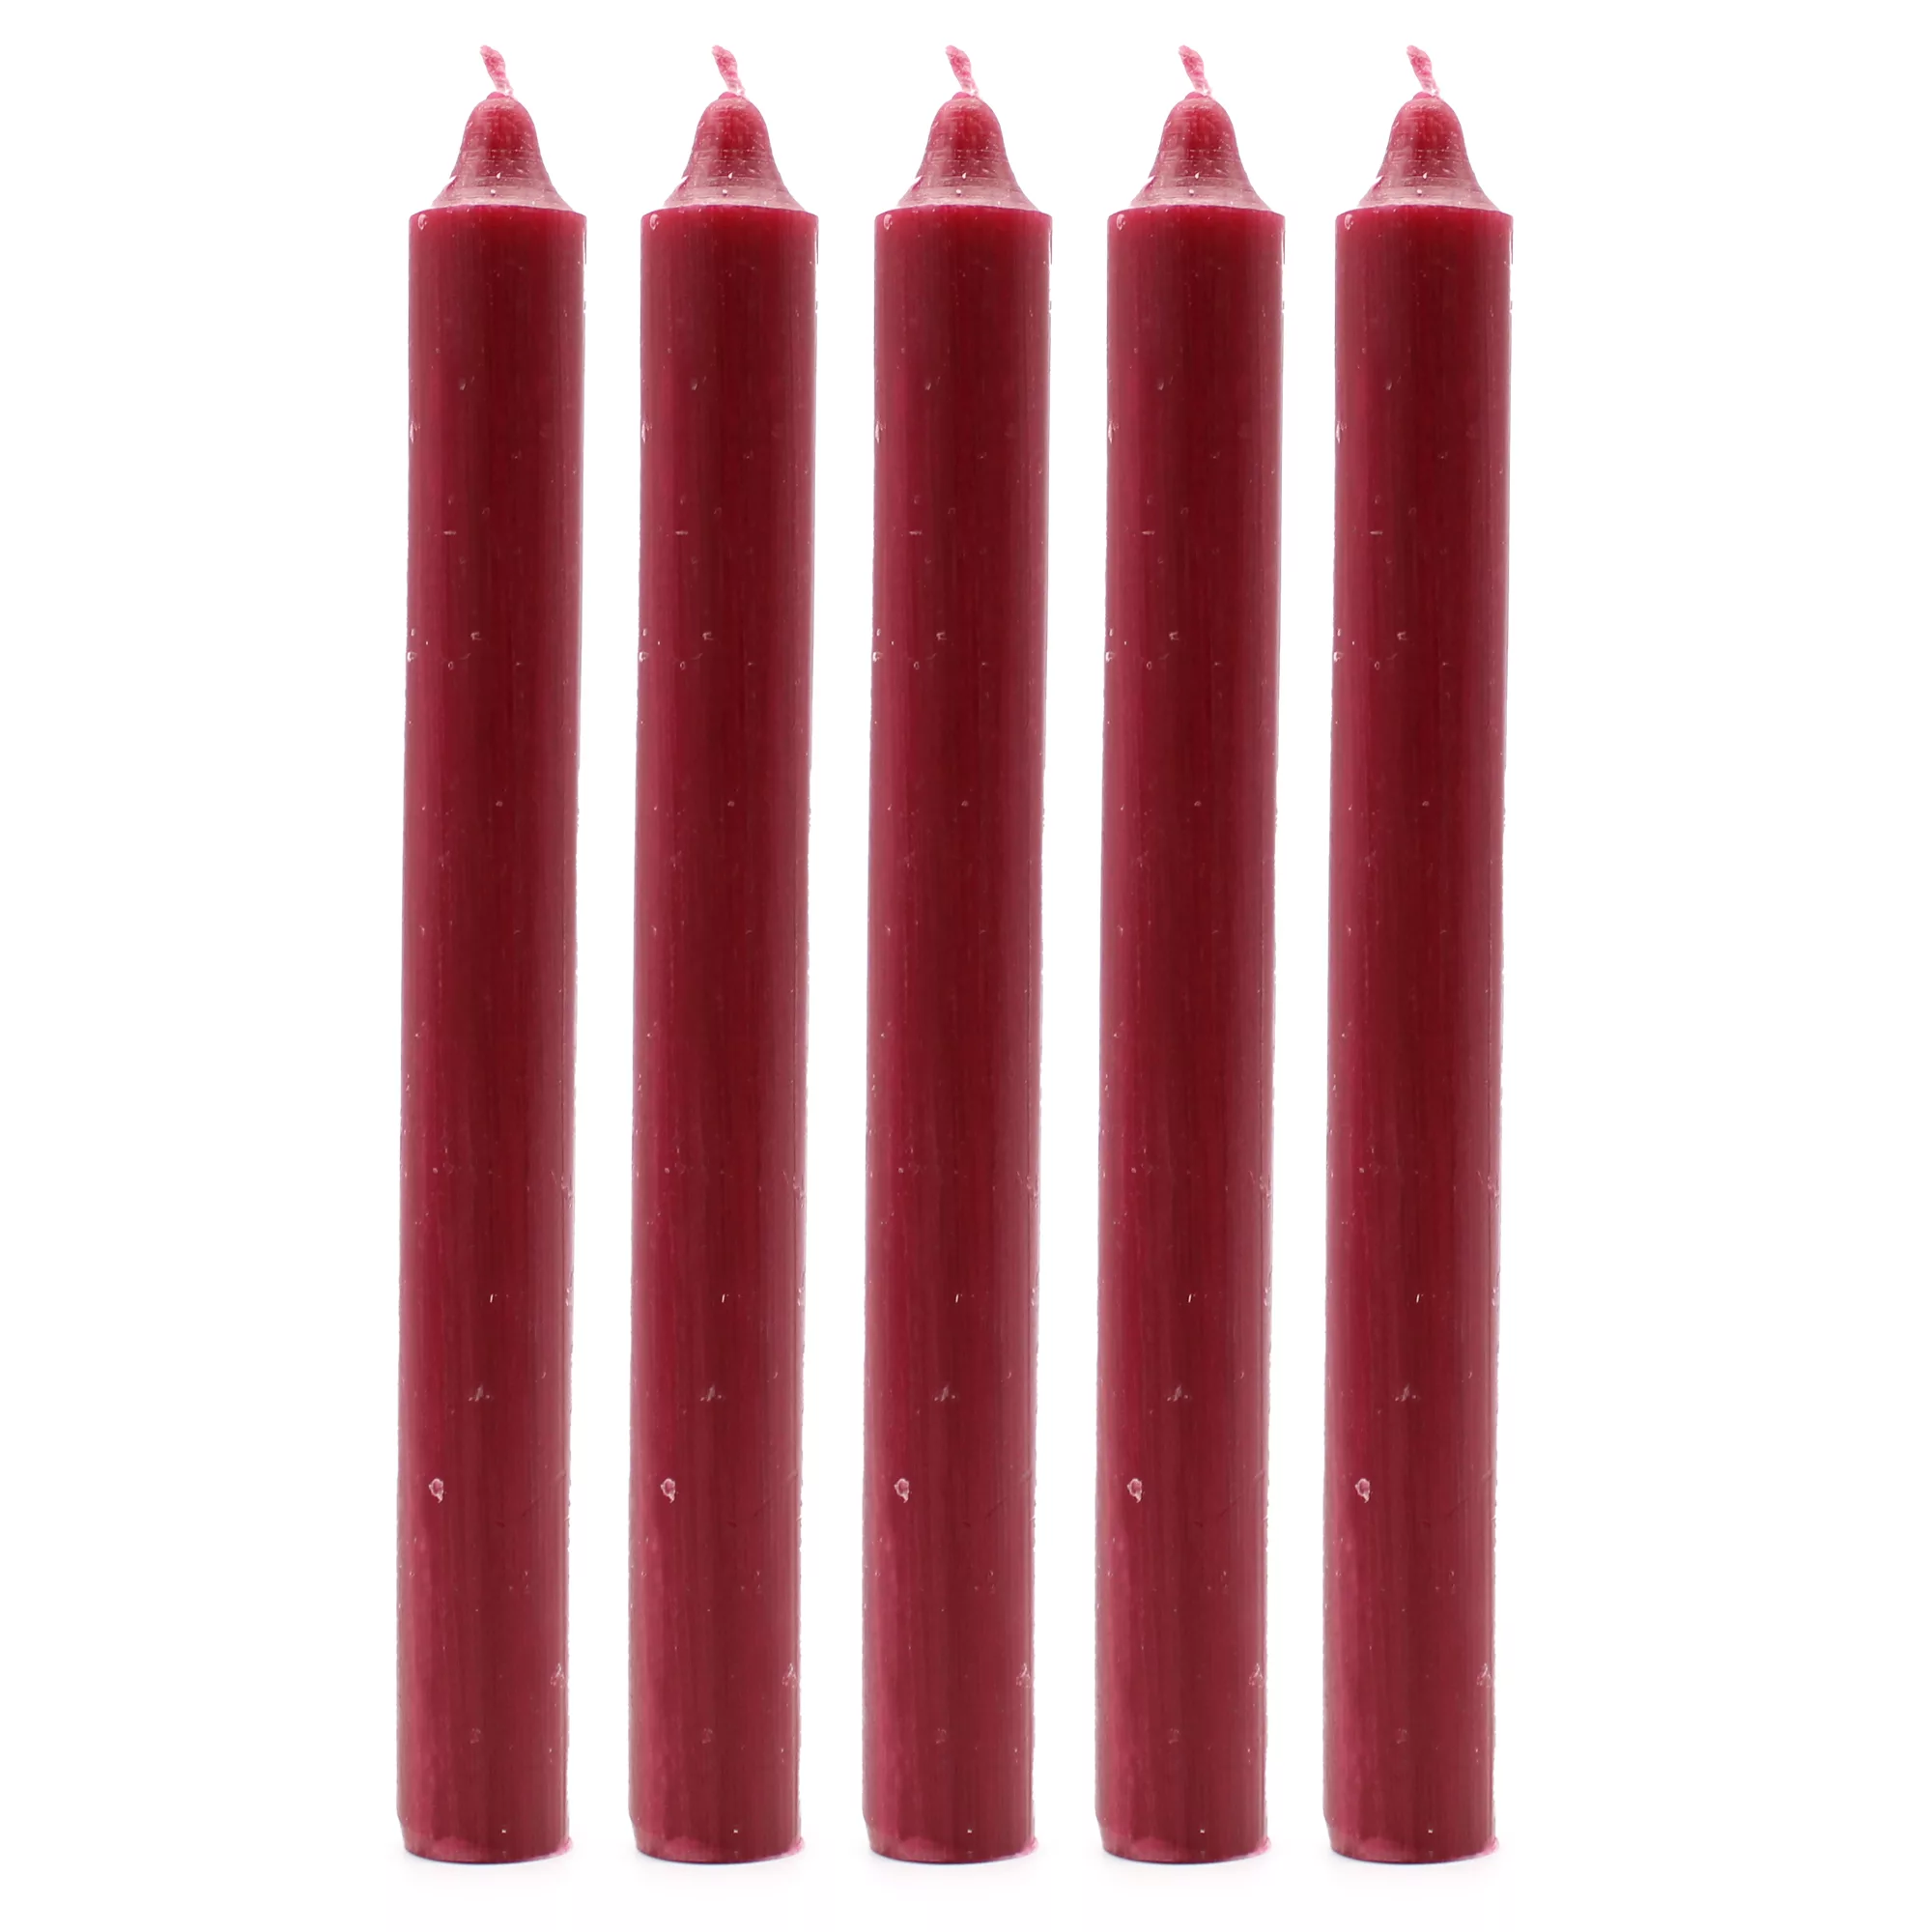 Solid Colour Dinner Candles – Rustic Burgandy – Pack of 5